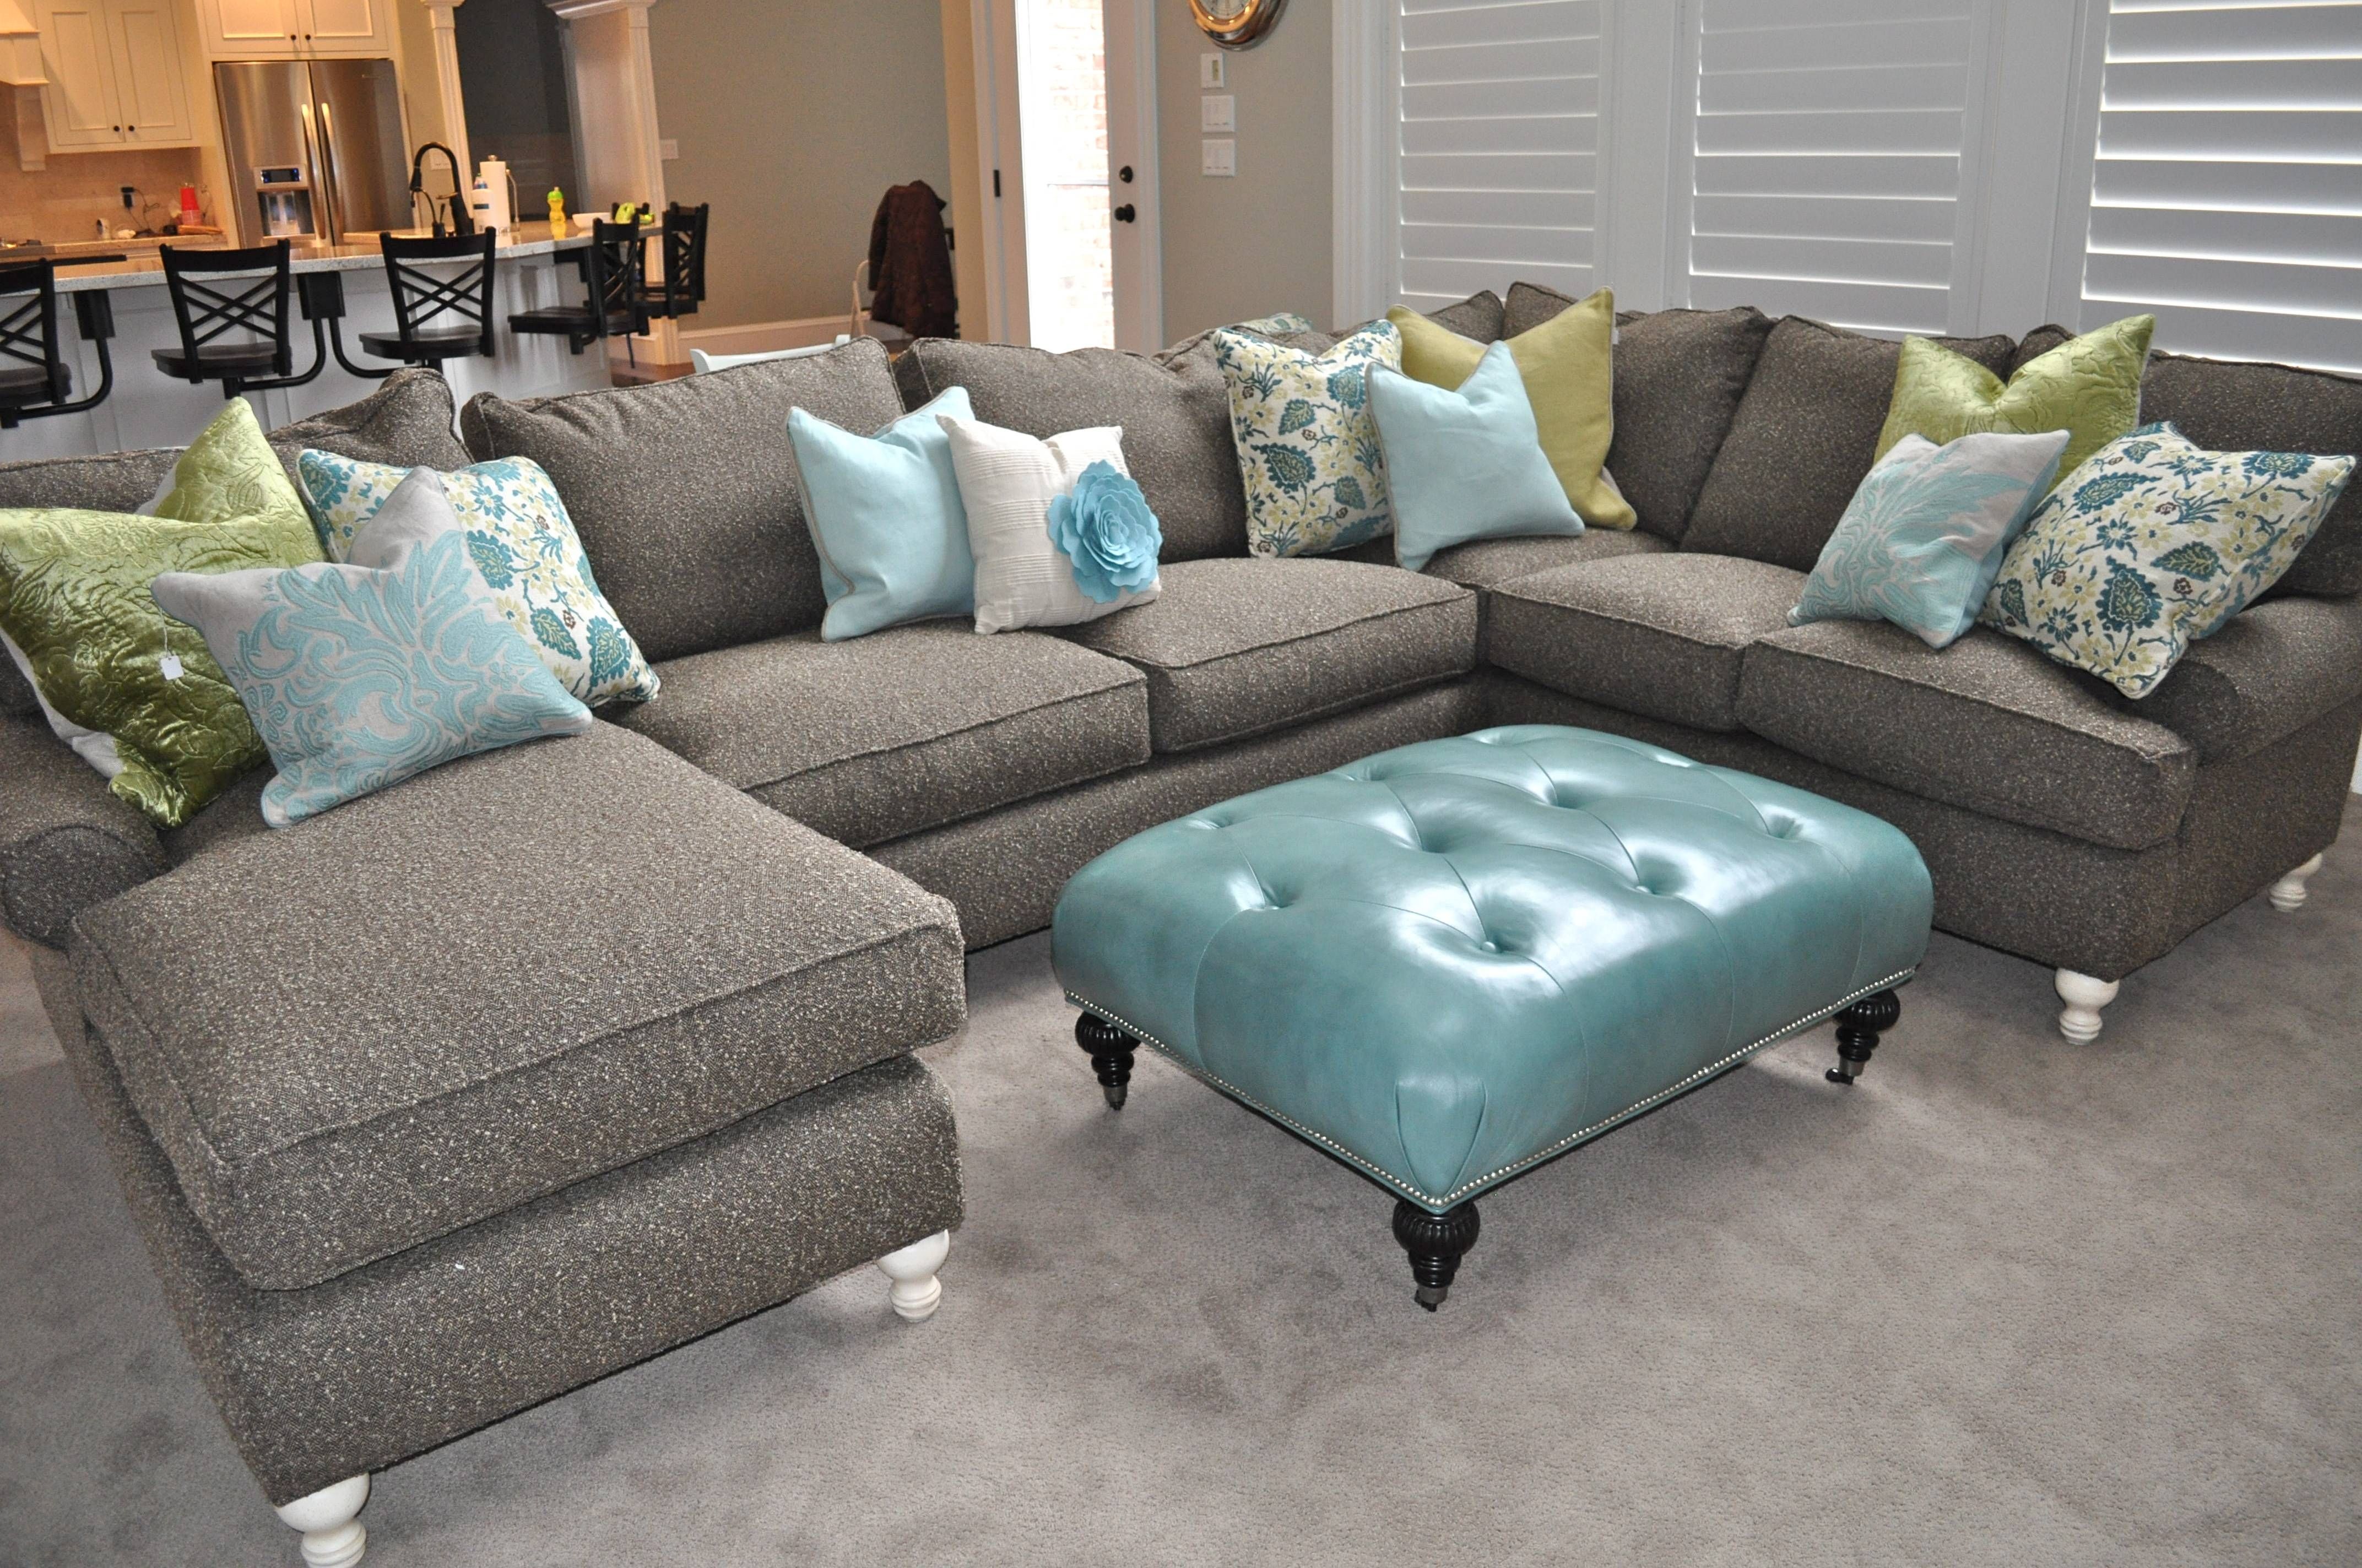 Sofas Center : Small Down Sectional Sofa Menzilperde Net With Down Filled Sectional Sofa (View 2 of 25)